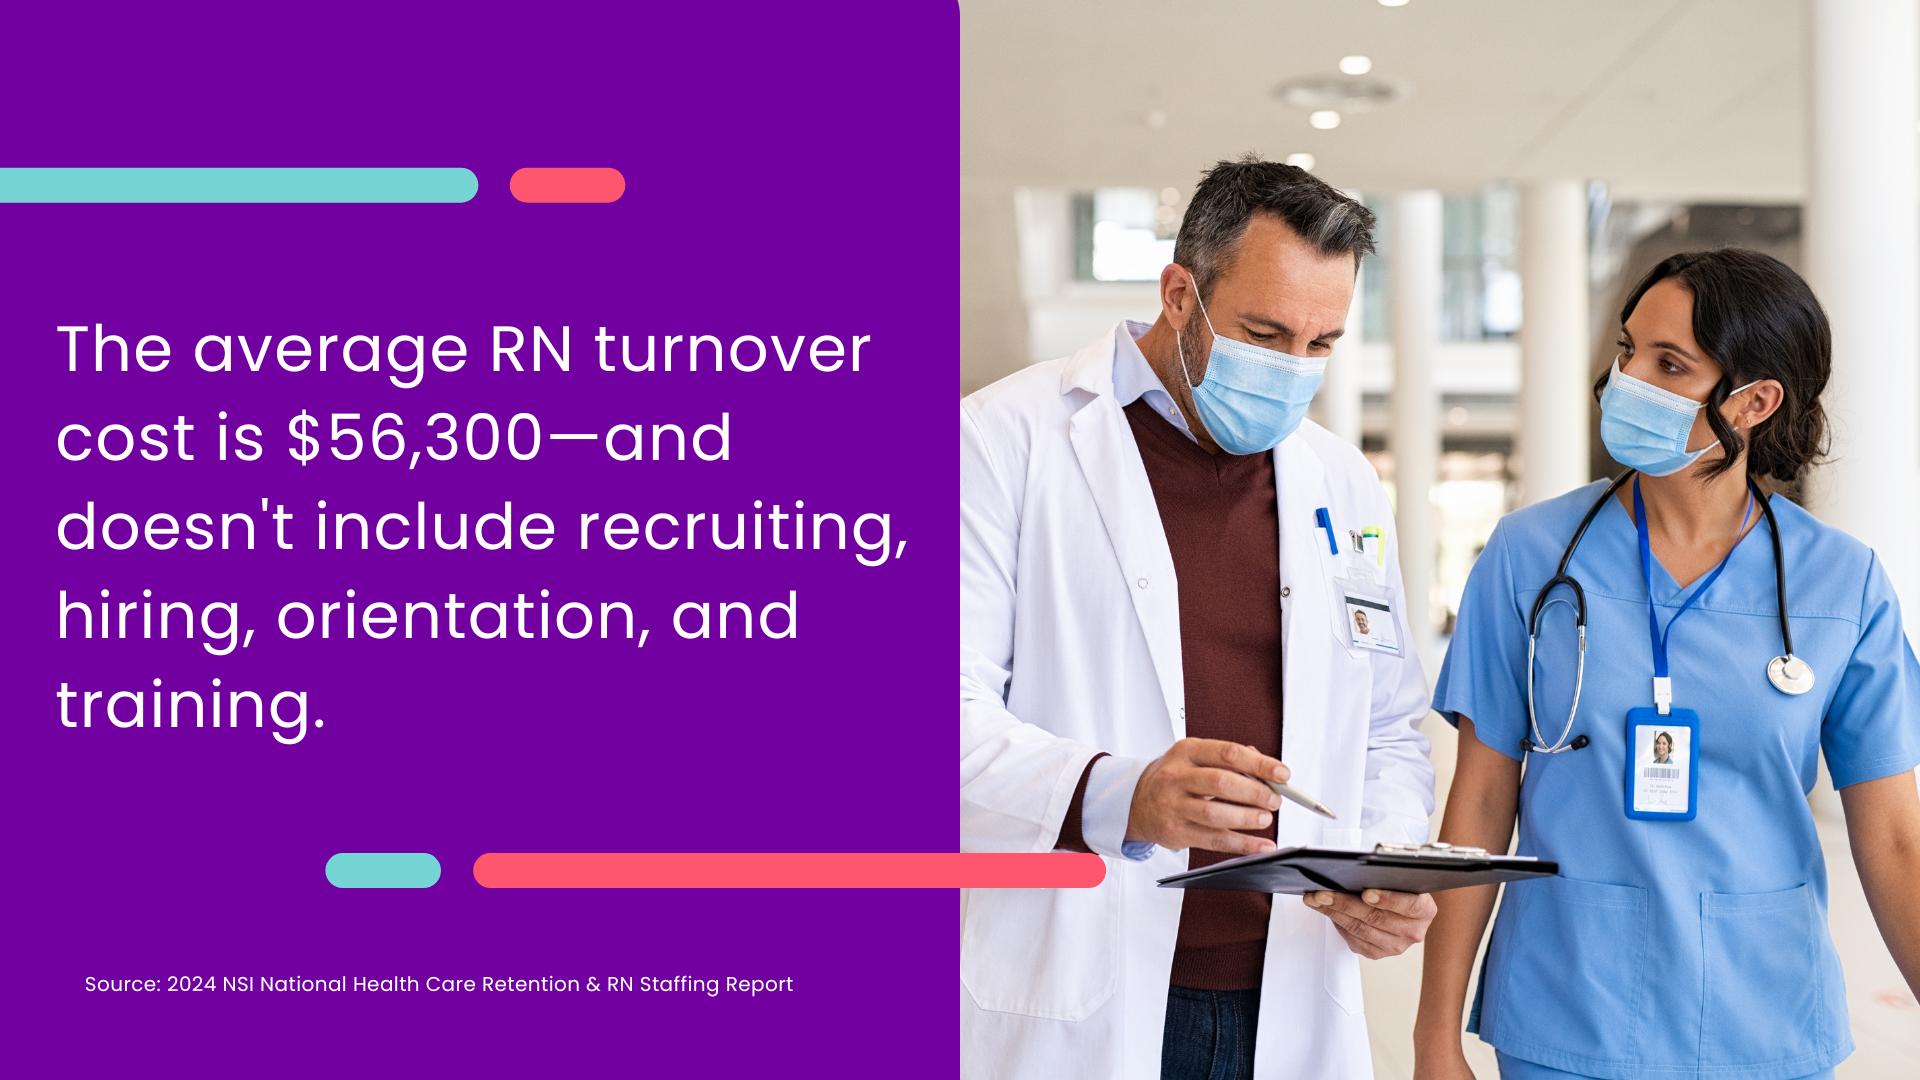 An image of a doctor and nurse wearing masks inside a hospital, with text that says the average RN turnover cost is $56,300. 